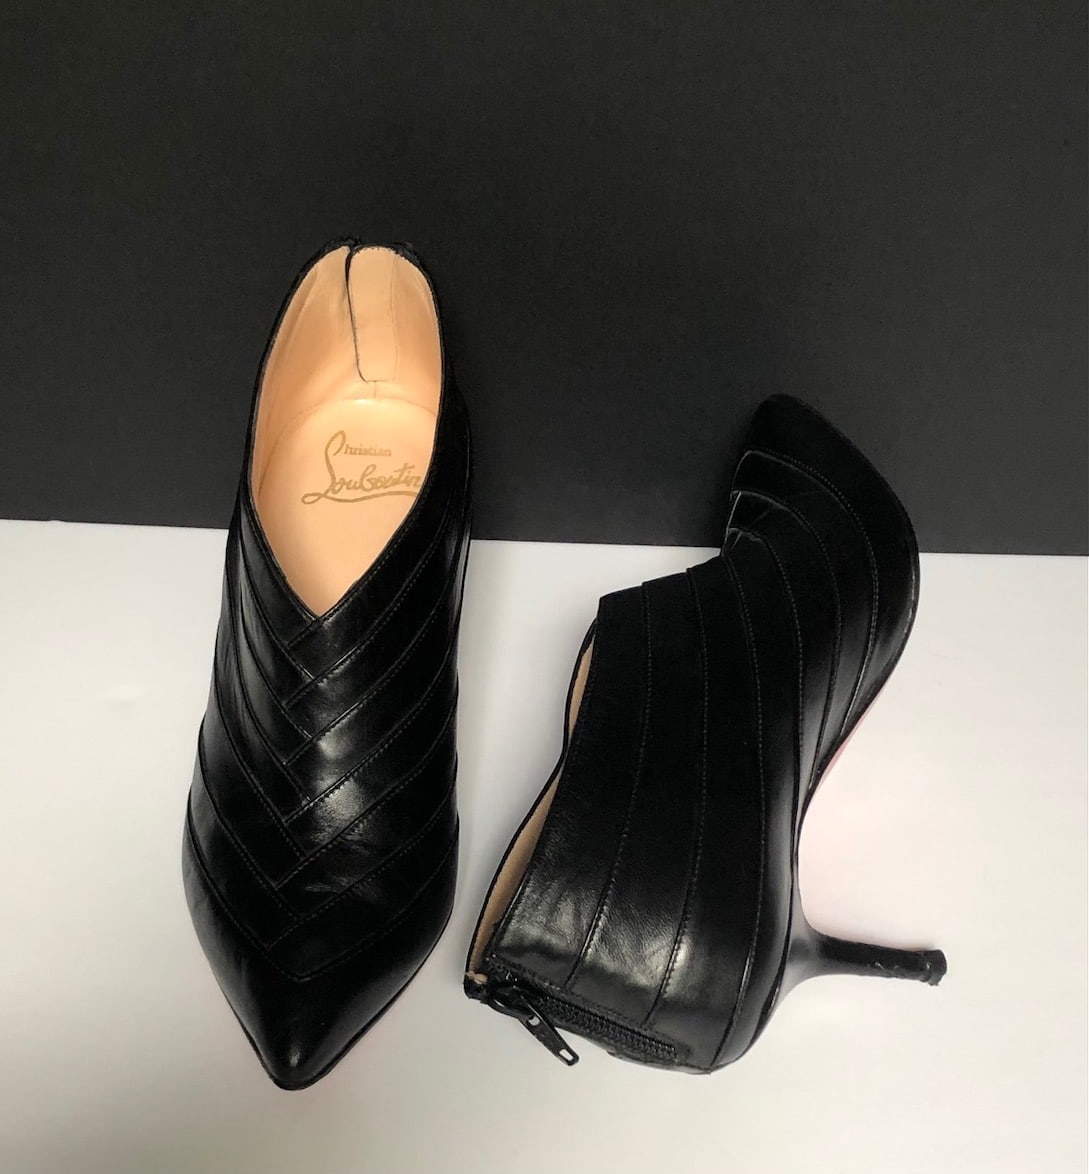 CHRISTIAN LOUBOUTIN Vintage Mulano Black Gold Calf Leather Pumps W/ Red  Soles Size 36 - Chelsea Vintage Couture